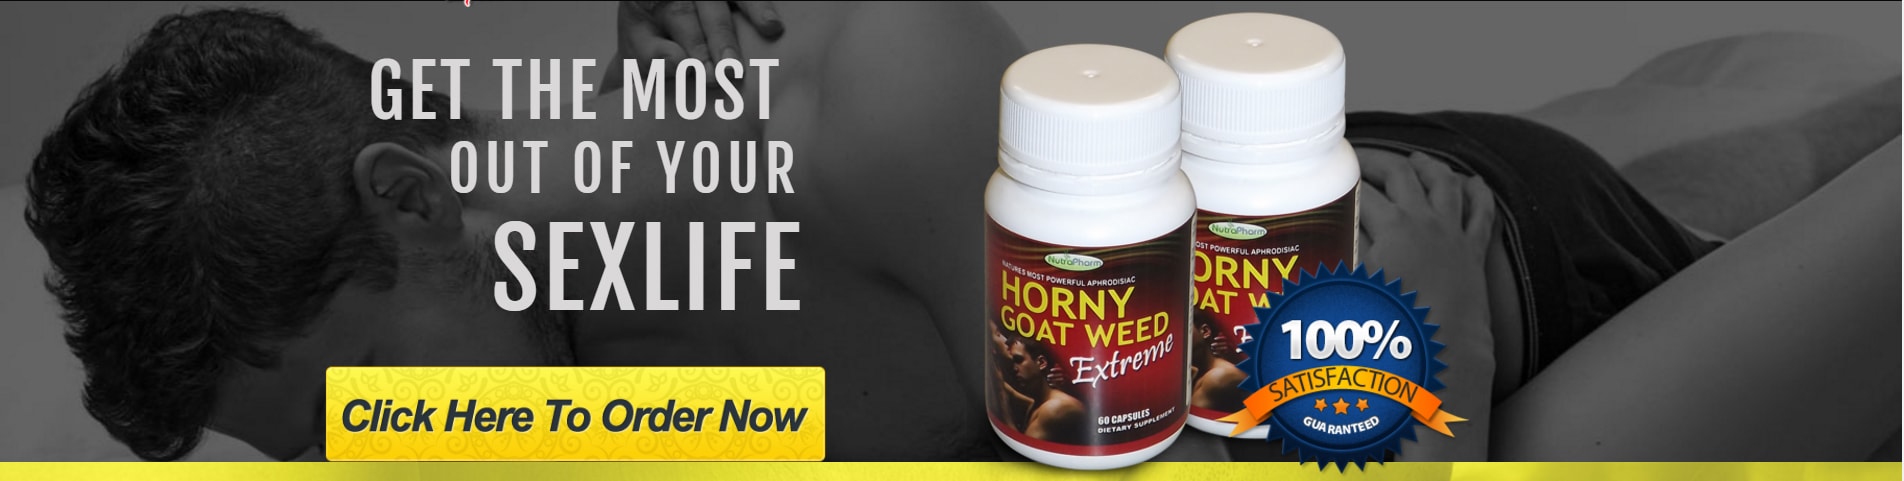 Horny Goatweed Extreme - Natural Powerful Aphrodisiac for Men and Women